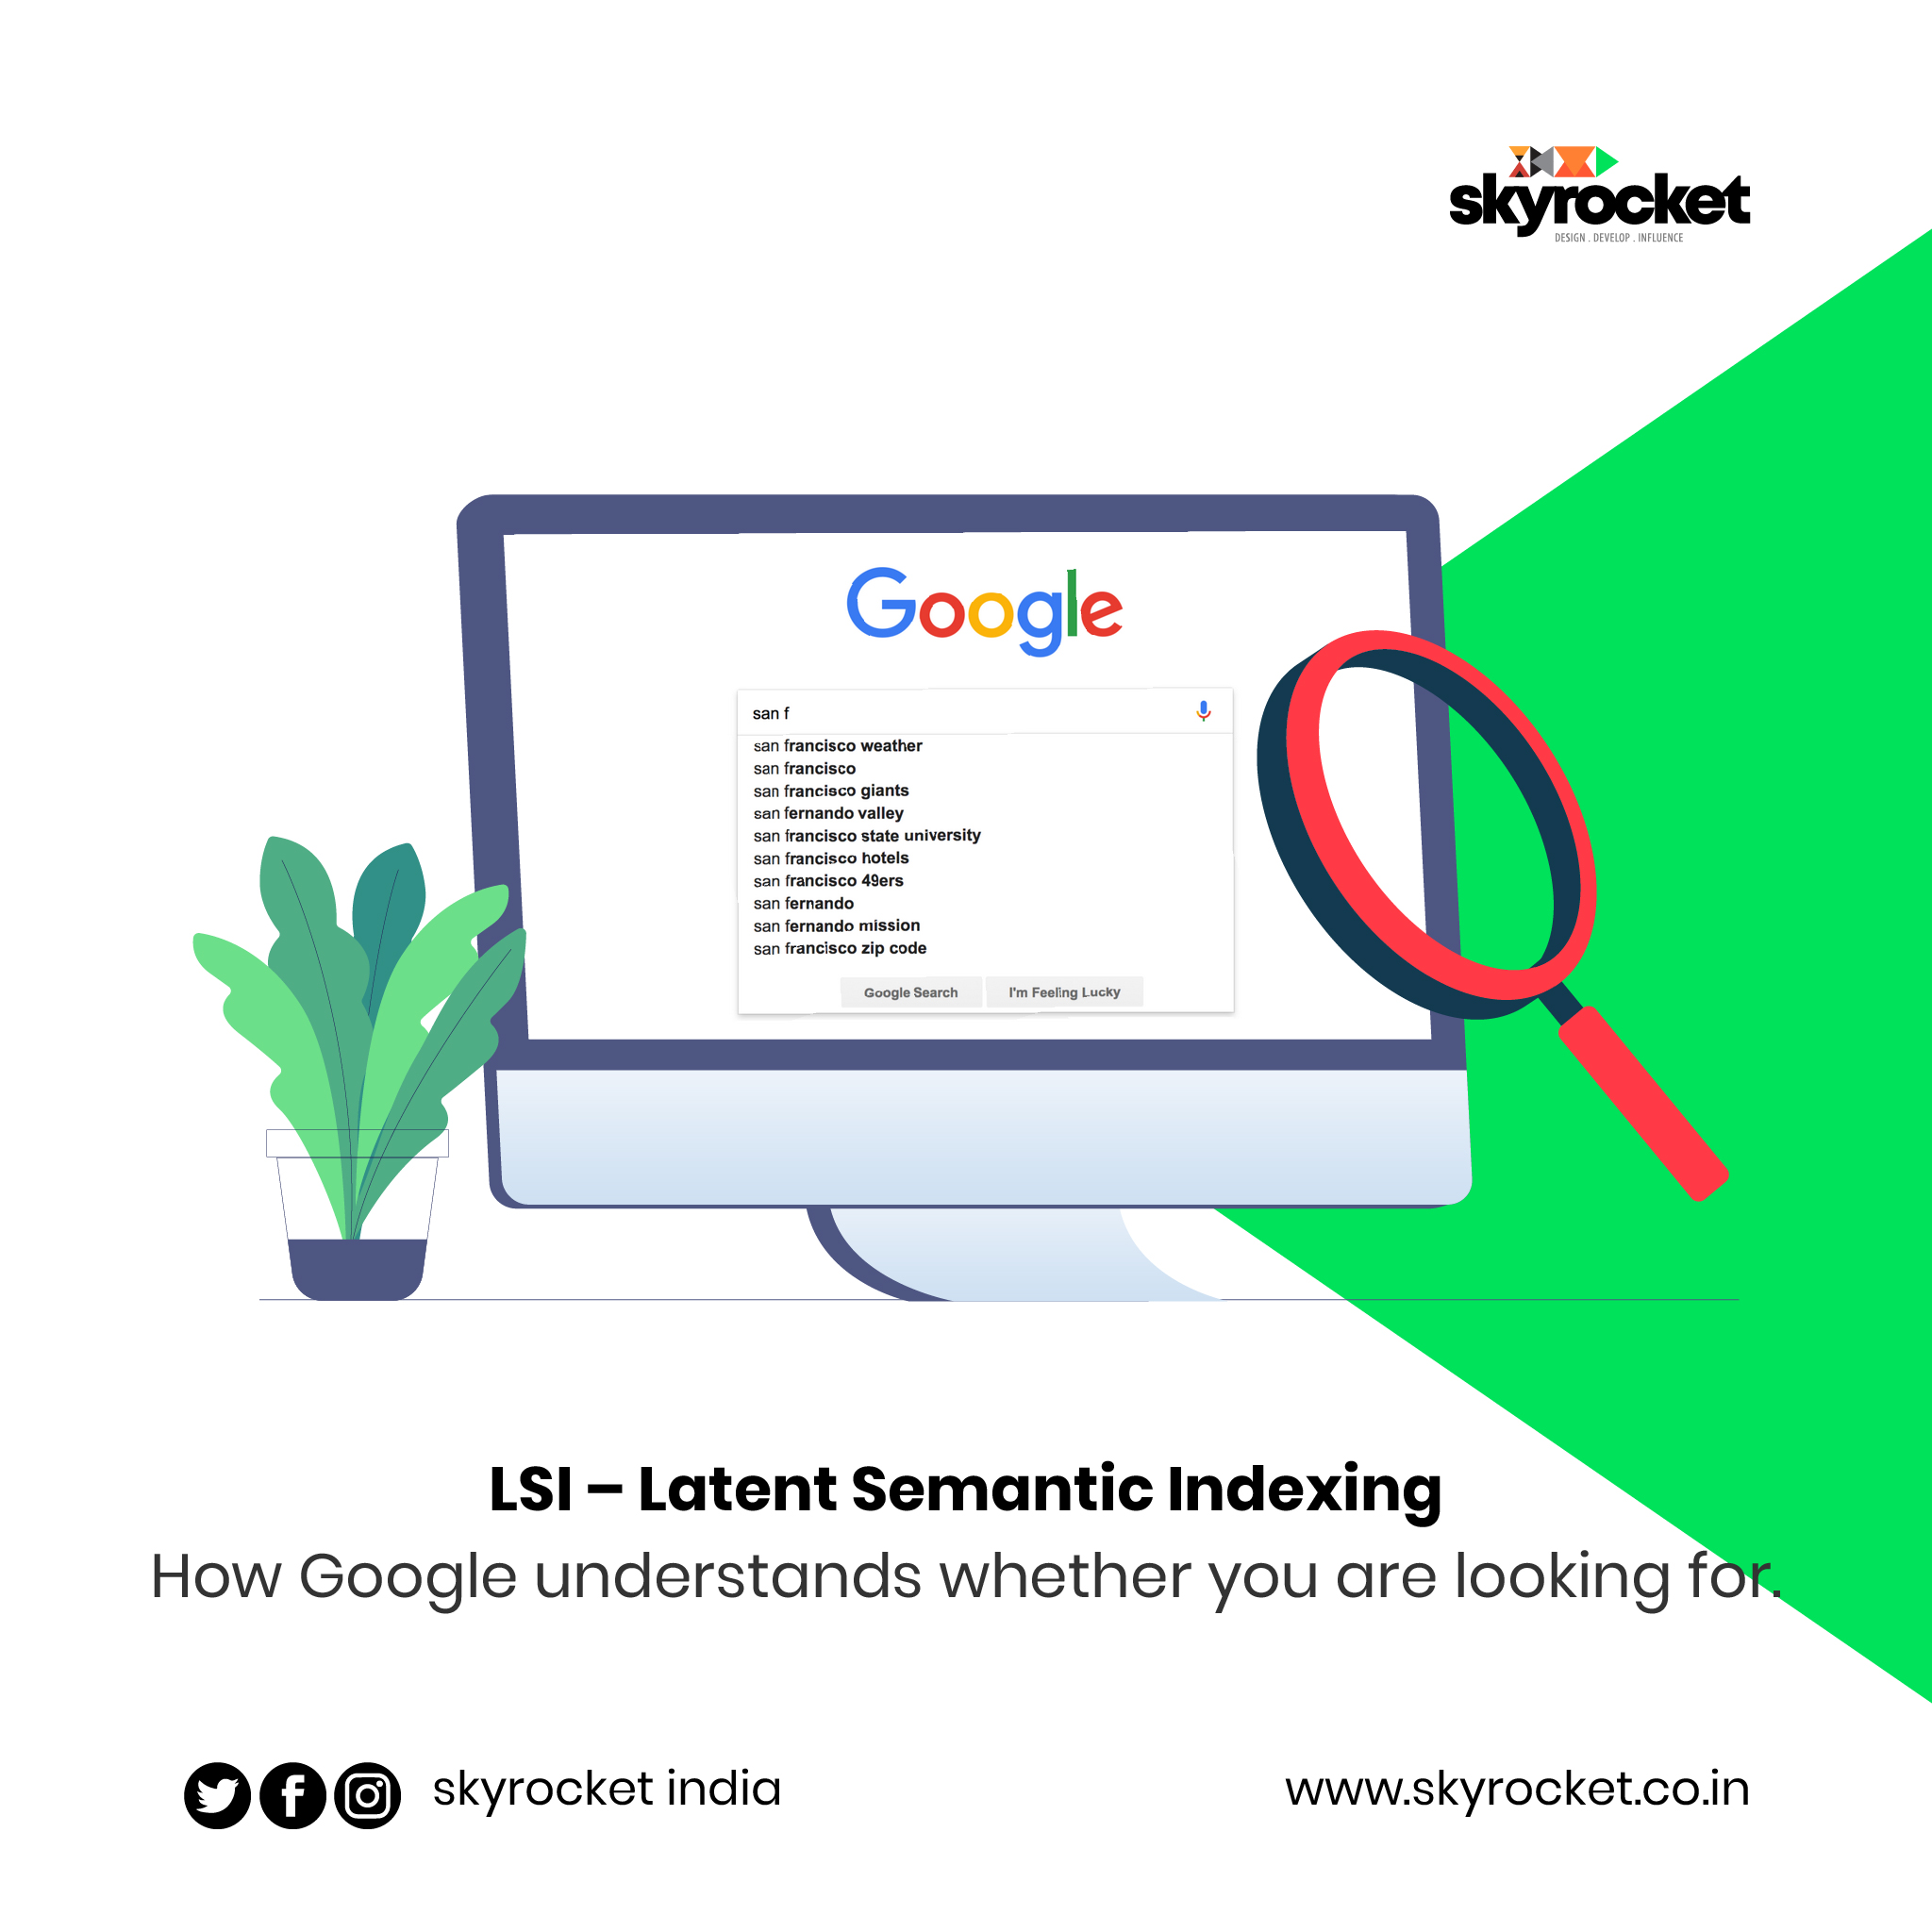 LSI – Latent Semantic Indexing | How Google understands whether you are looking for “Apple” the fruit or “Apple” the computer.